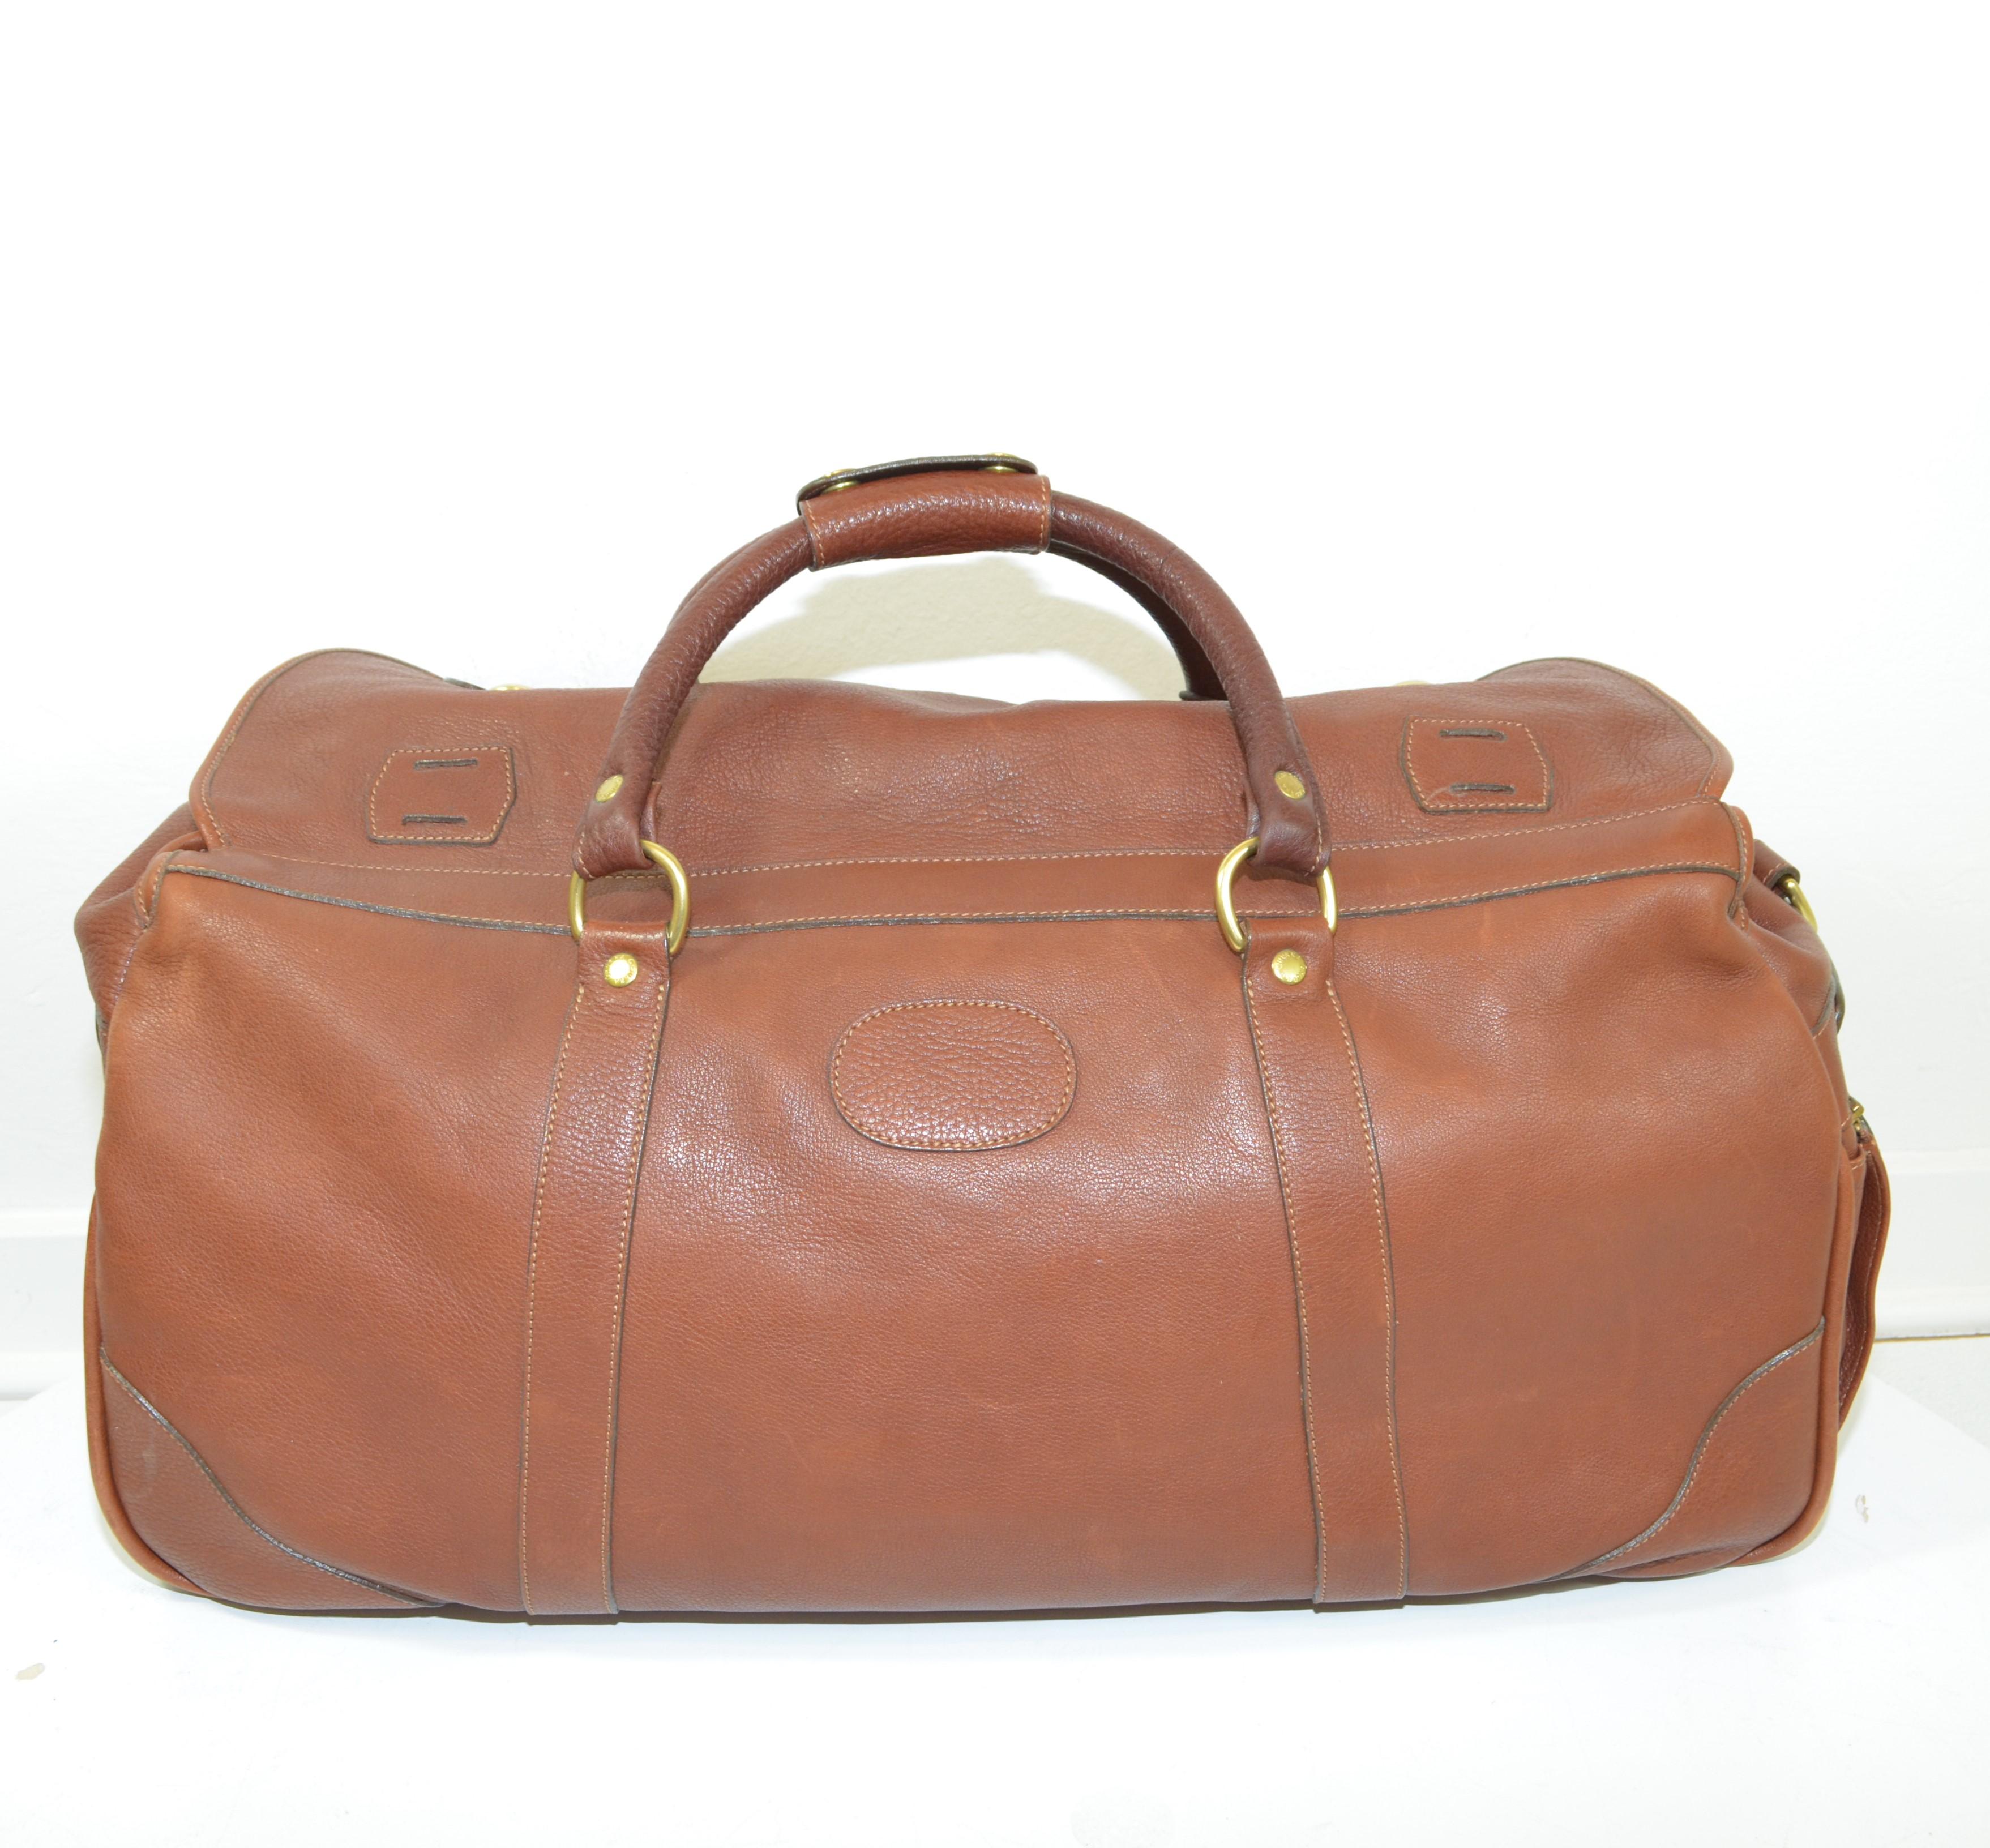 Women's or Men's Ghurka Vintage Chestnut Leather Duffel Bag with Travel Accessories